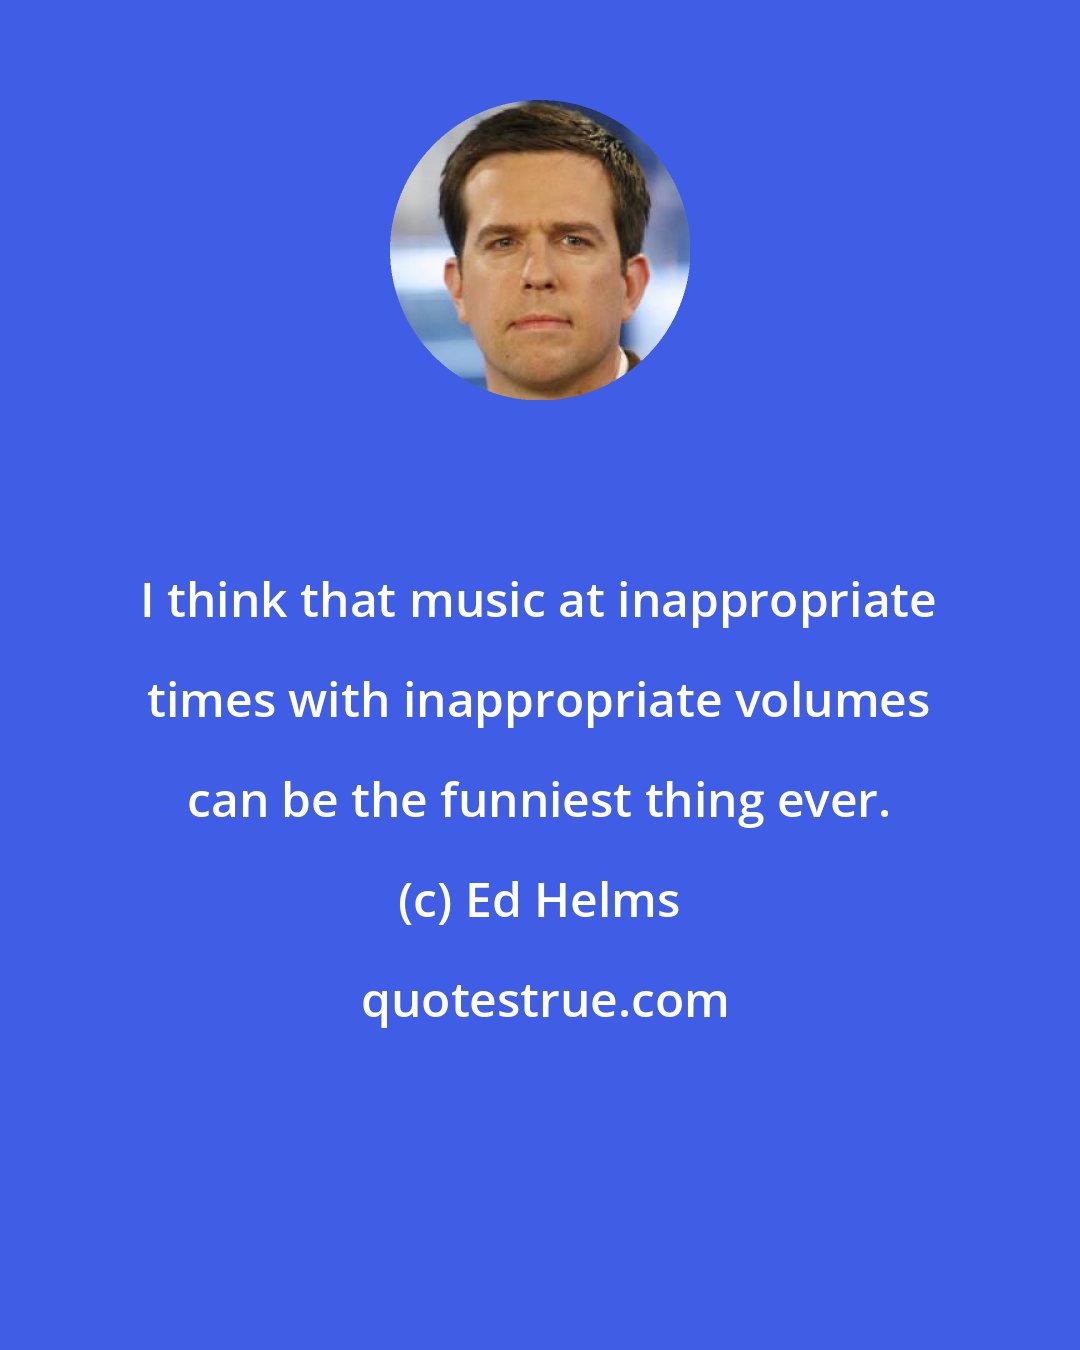 Ed Helms: I think that music at inappropriate times with inappropriate volumes can be the funniest thing ever.